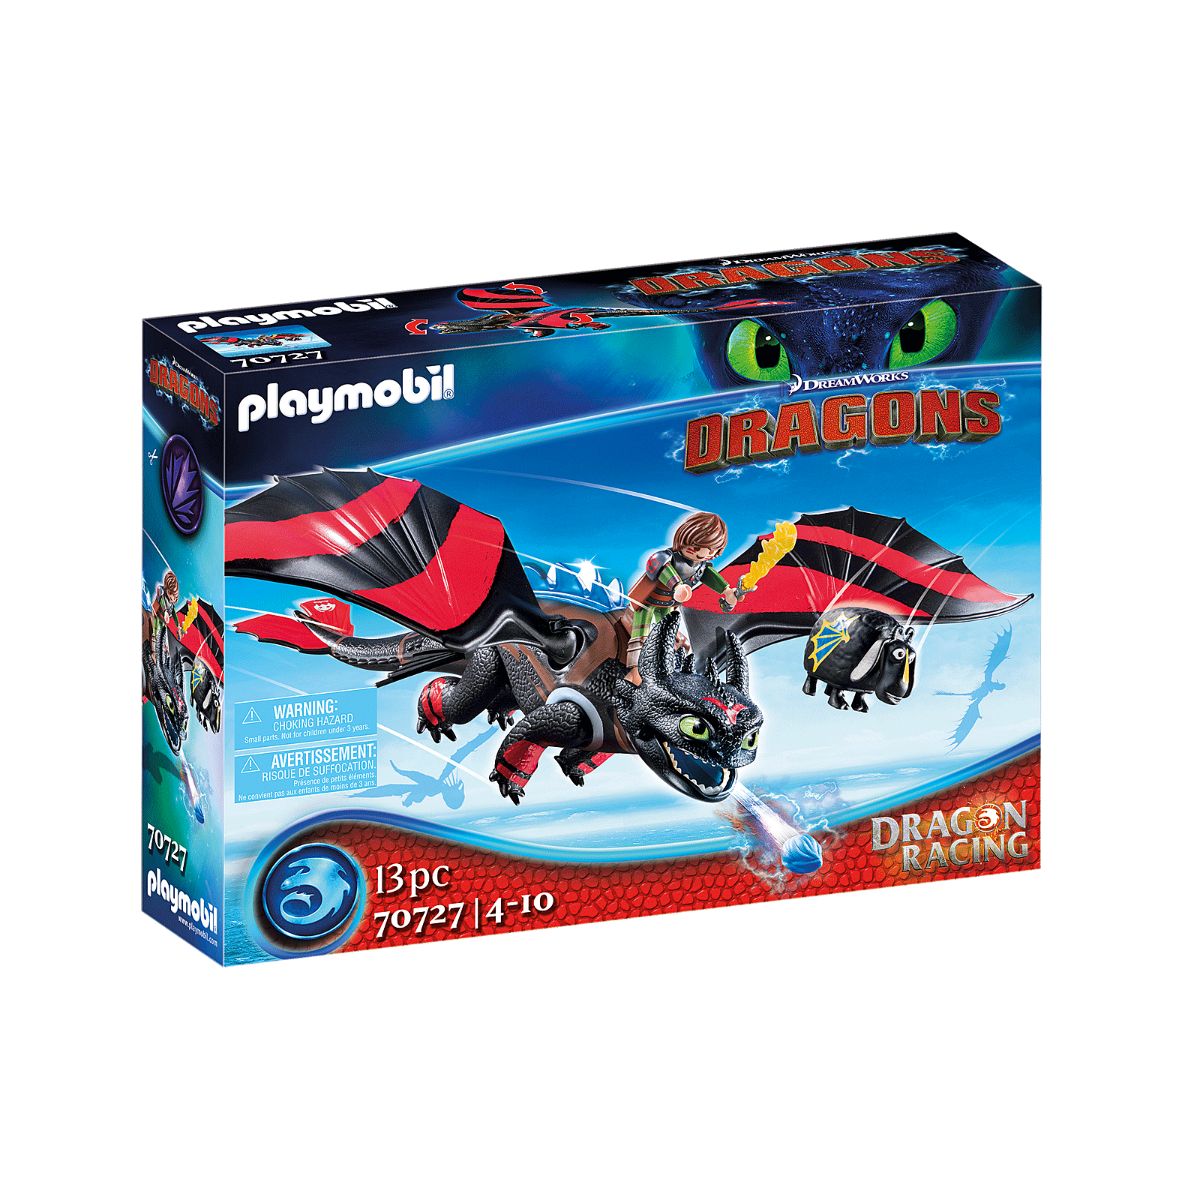 Set Playmobil Dragons – Cursa dragonilor: Hiccup si Toothless